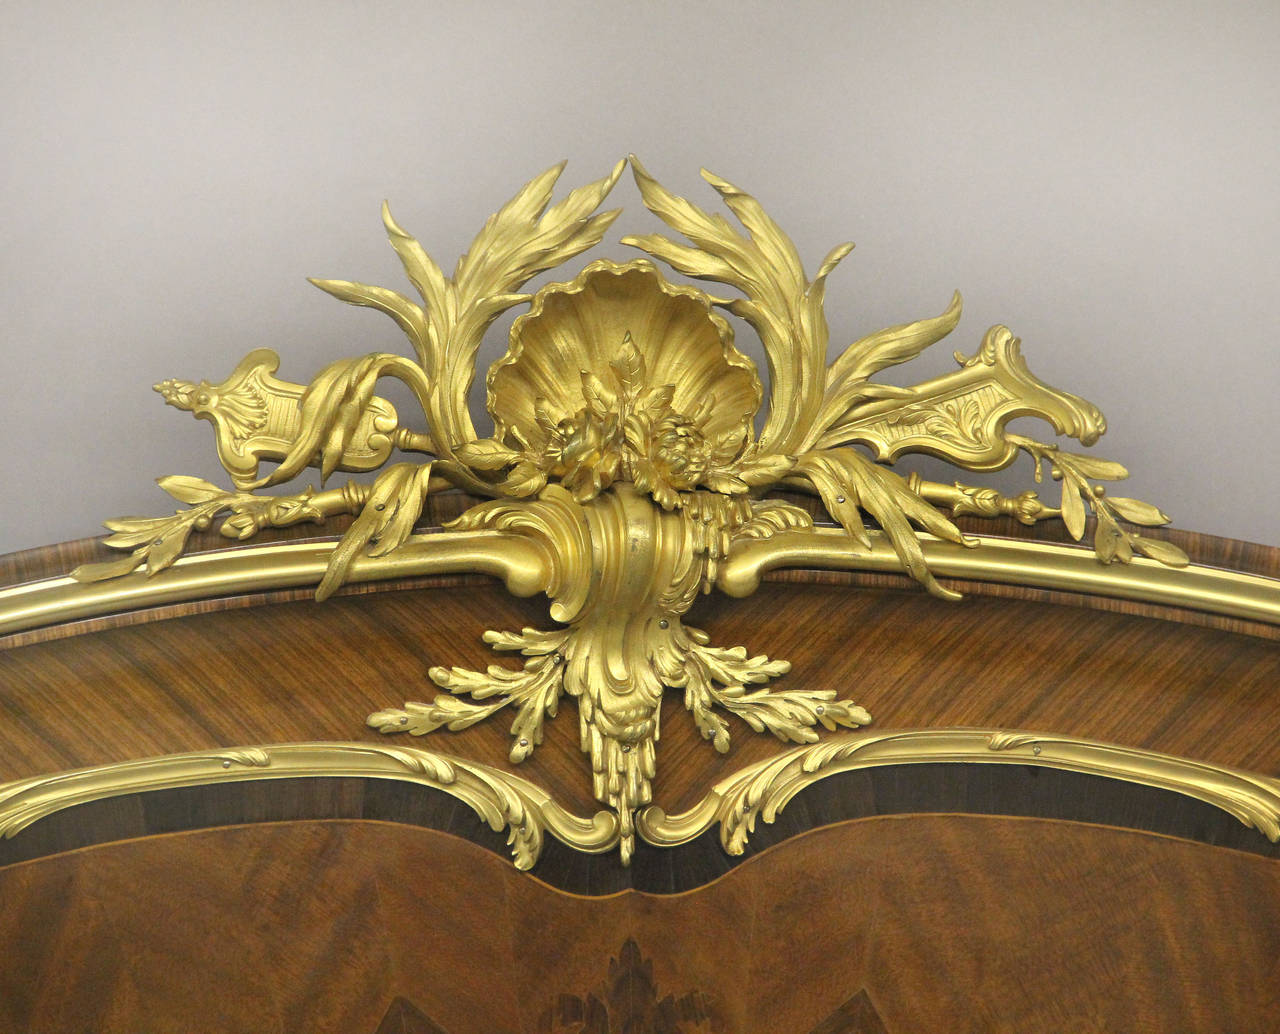 A Very Fine Late 19th / Early 20th Century Louis XV Style Gilt Bronze Mounted Inlaid Foliate Marquetry and Parquetry King Size Bed

By François Linke

The headboard and footboard centered by a large bronze mount of a scalloped shell and flower